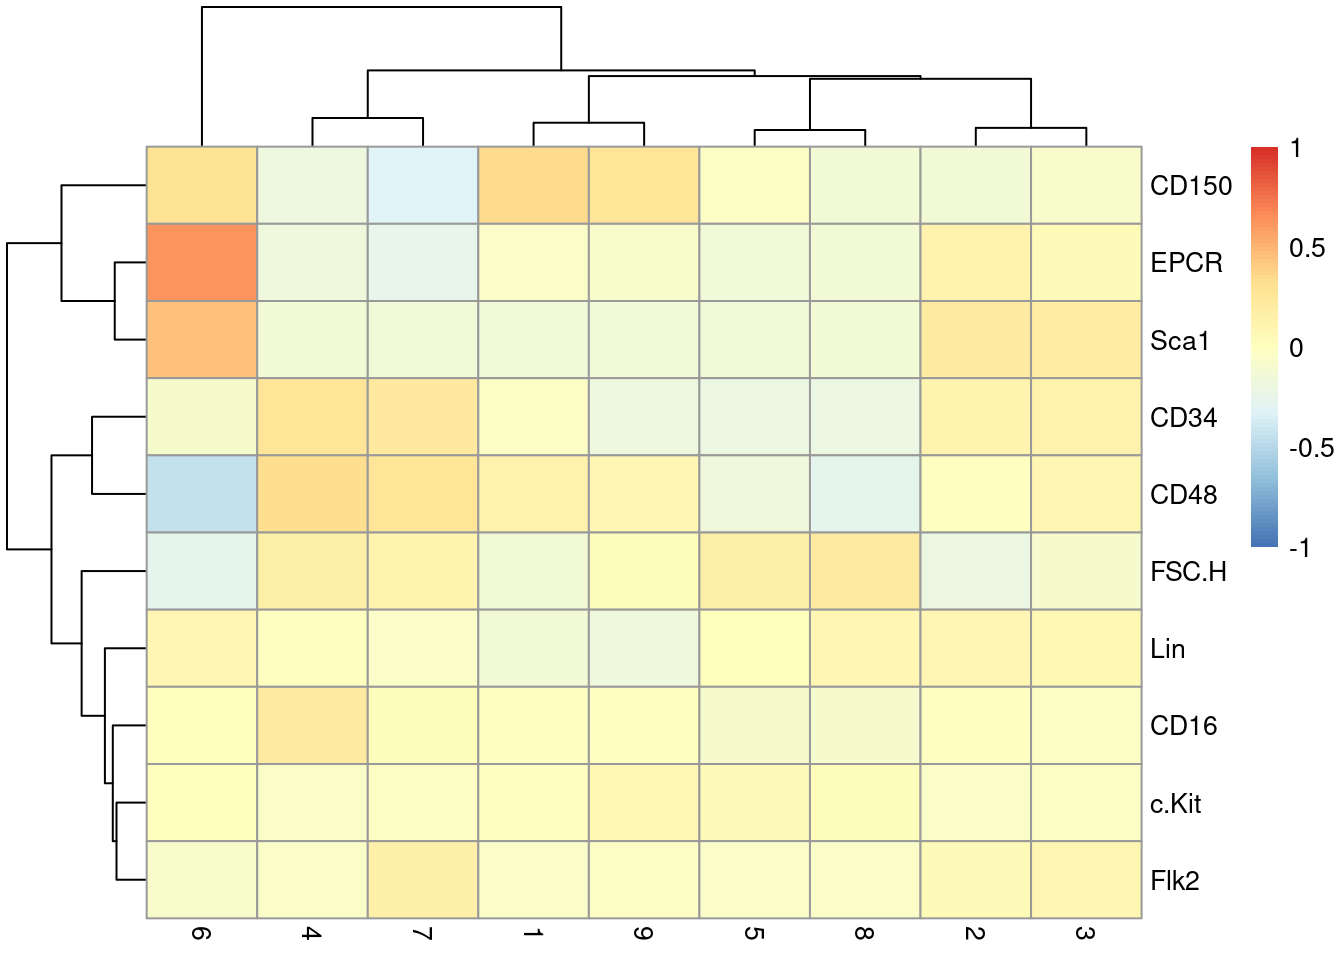 Heatmap of the centered log-average intensity for each target protein quantified by FACS in the Nestorowa HSC dataset.